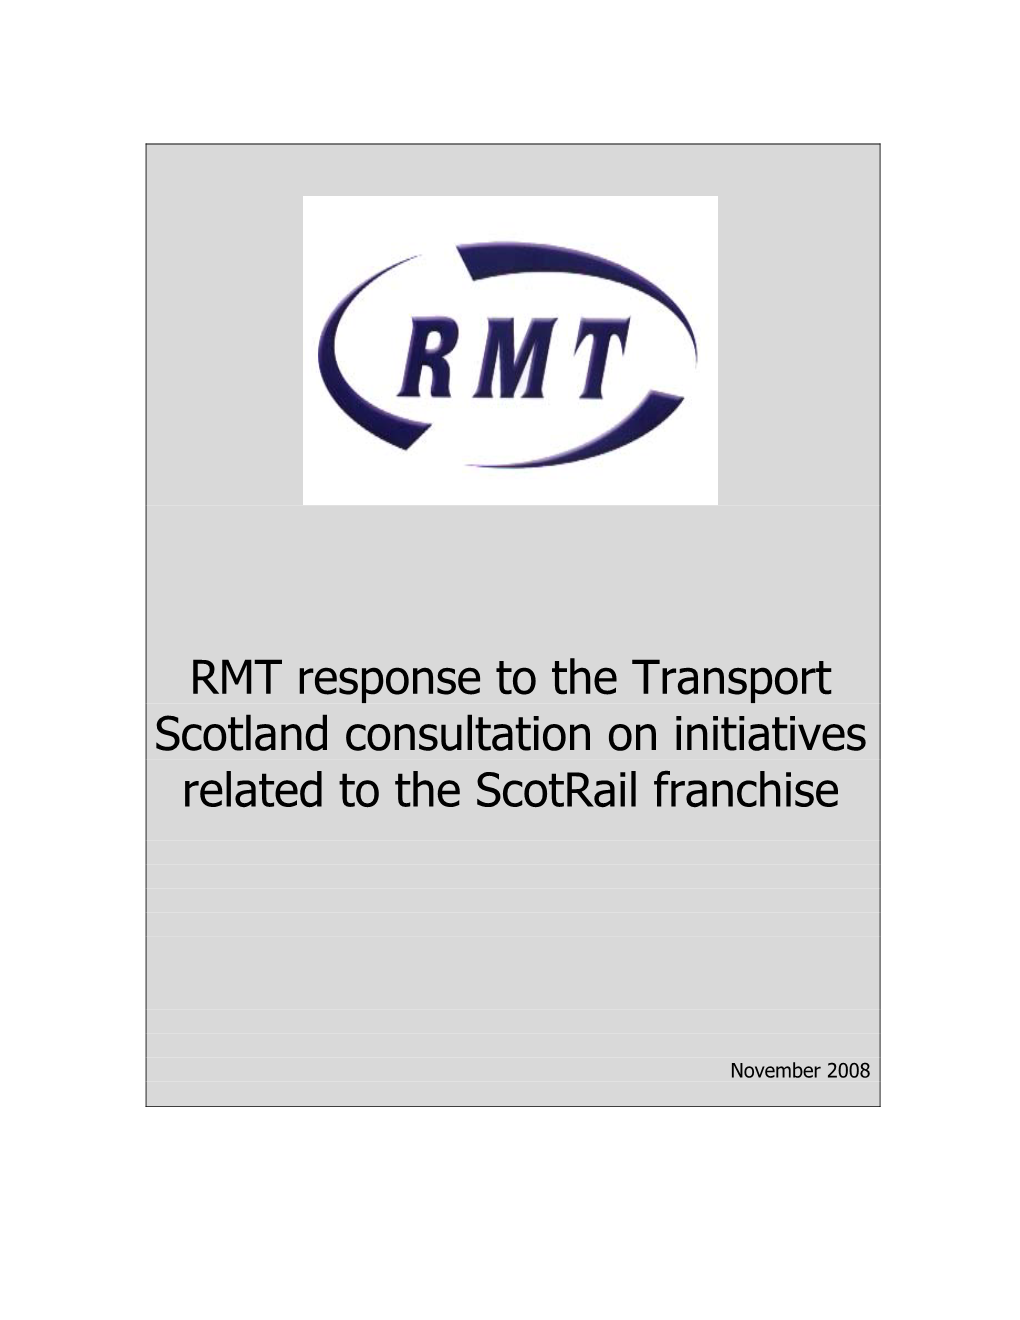 RMT Response to the Transport Scotland Consultation on Initiatives Related to the Scotrail Franchise